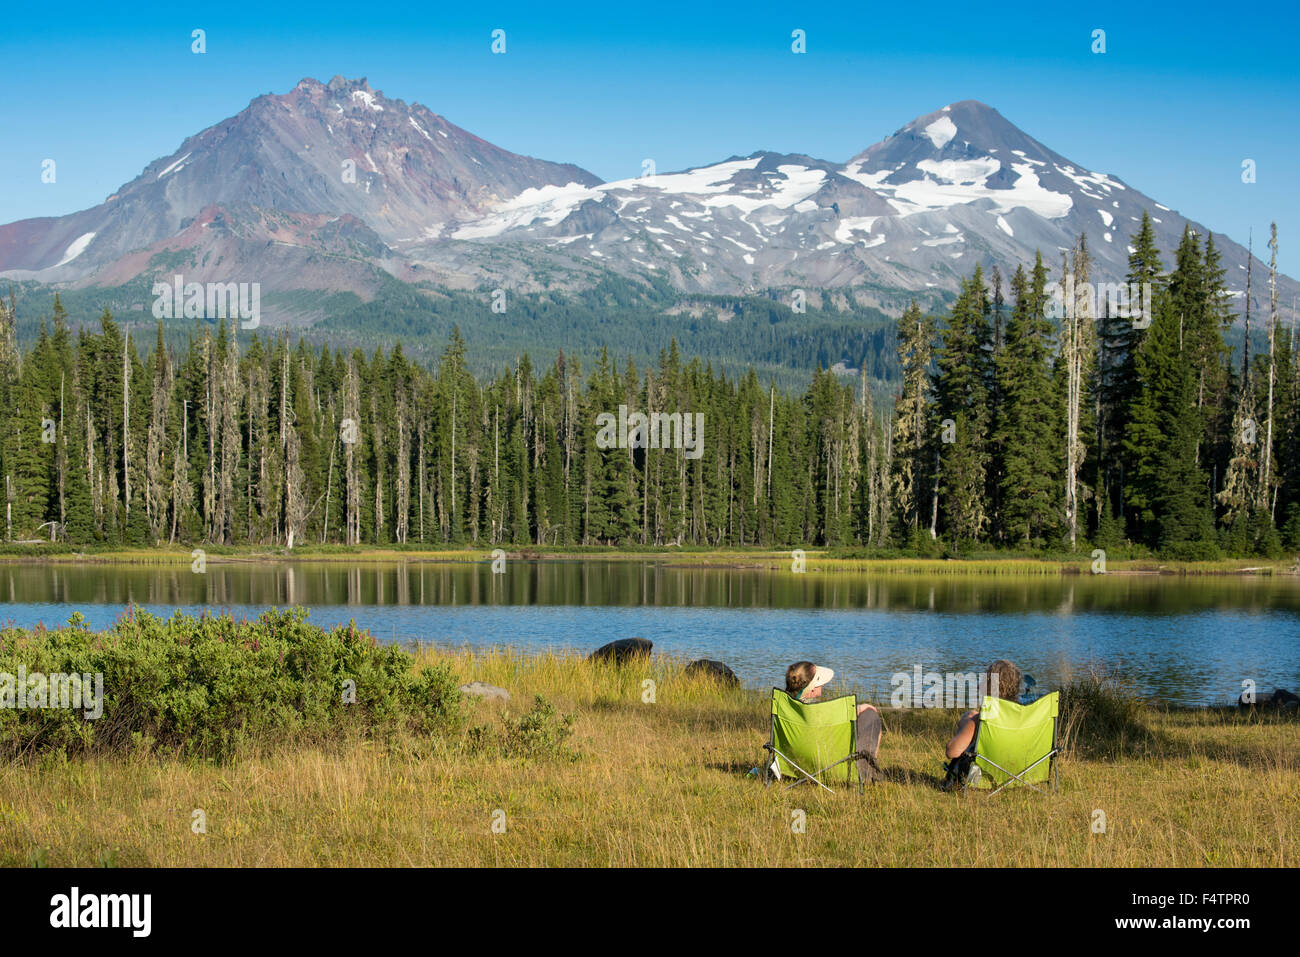 USA, Oregon, Lane County, Willamette, National Forest, Scott Lake, two women sitting in chairs Stock Photo